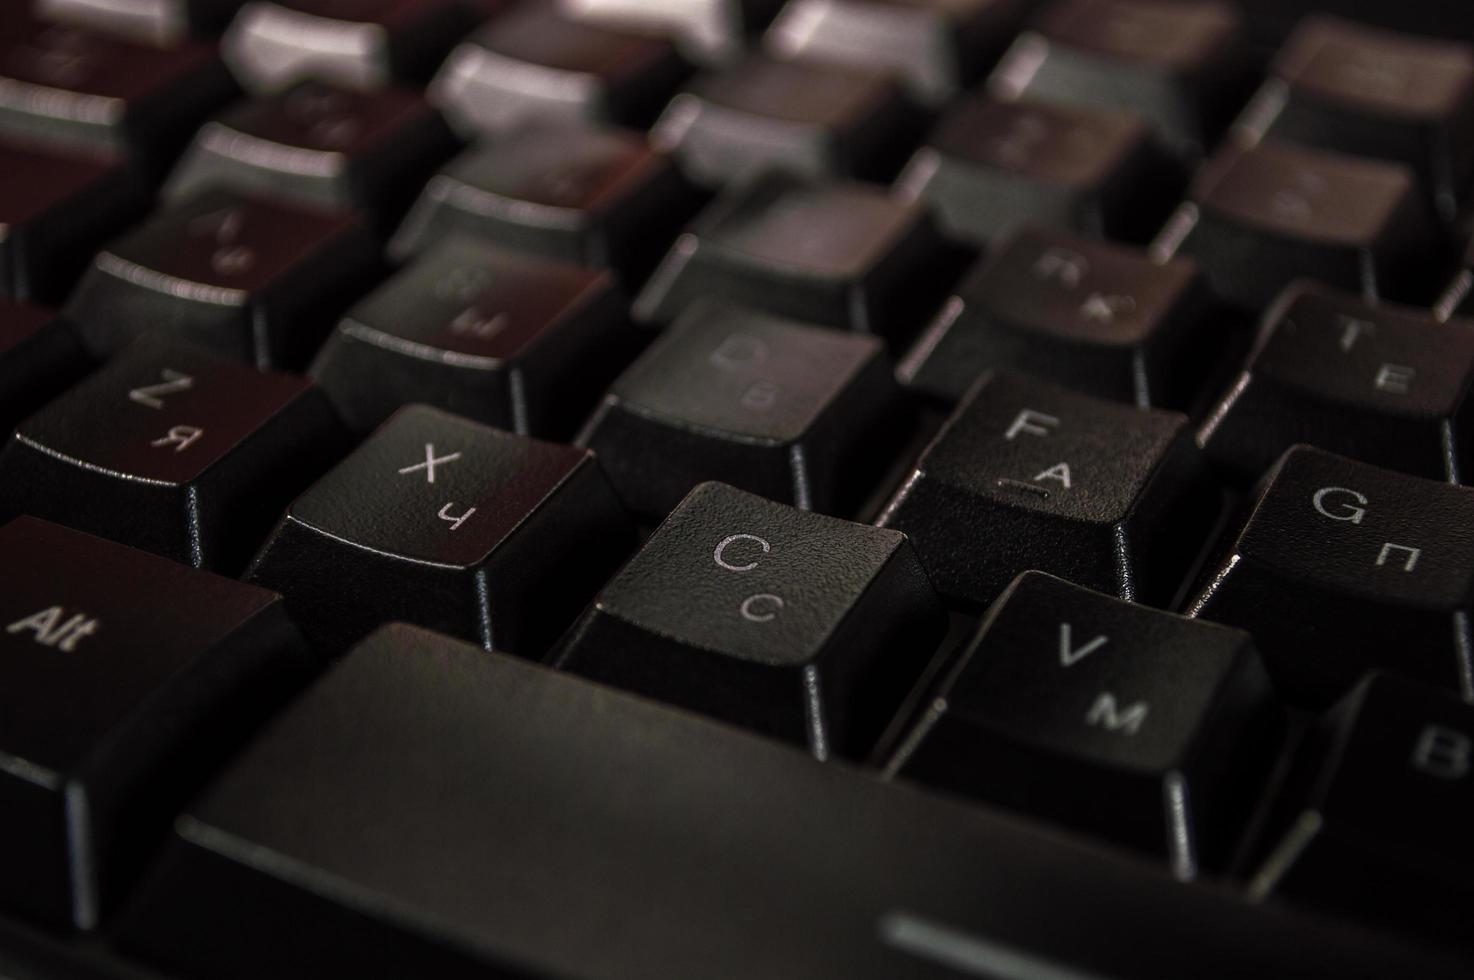 Abstract background of black computer keyboard photo